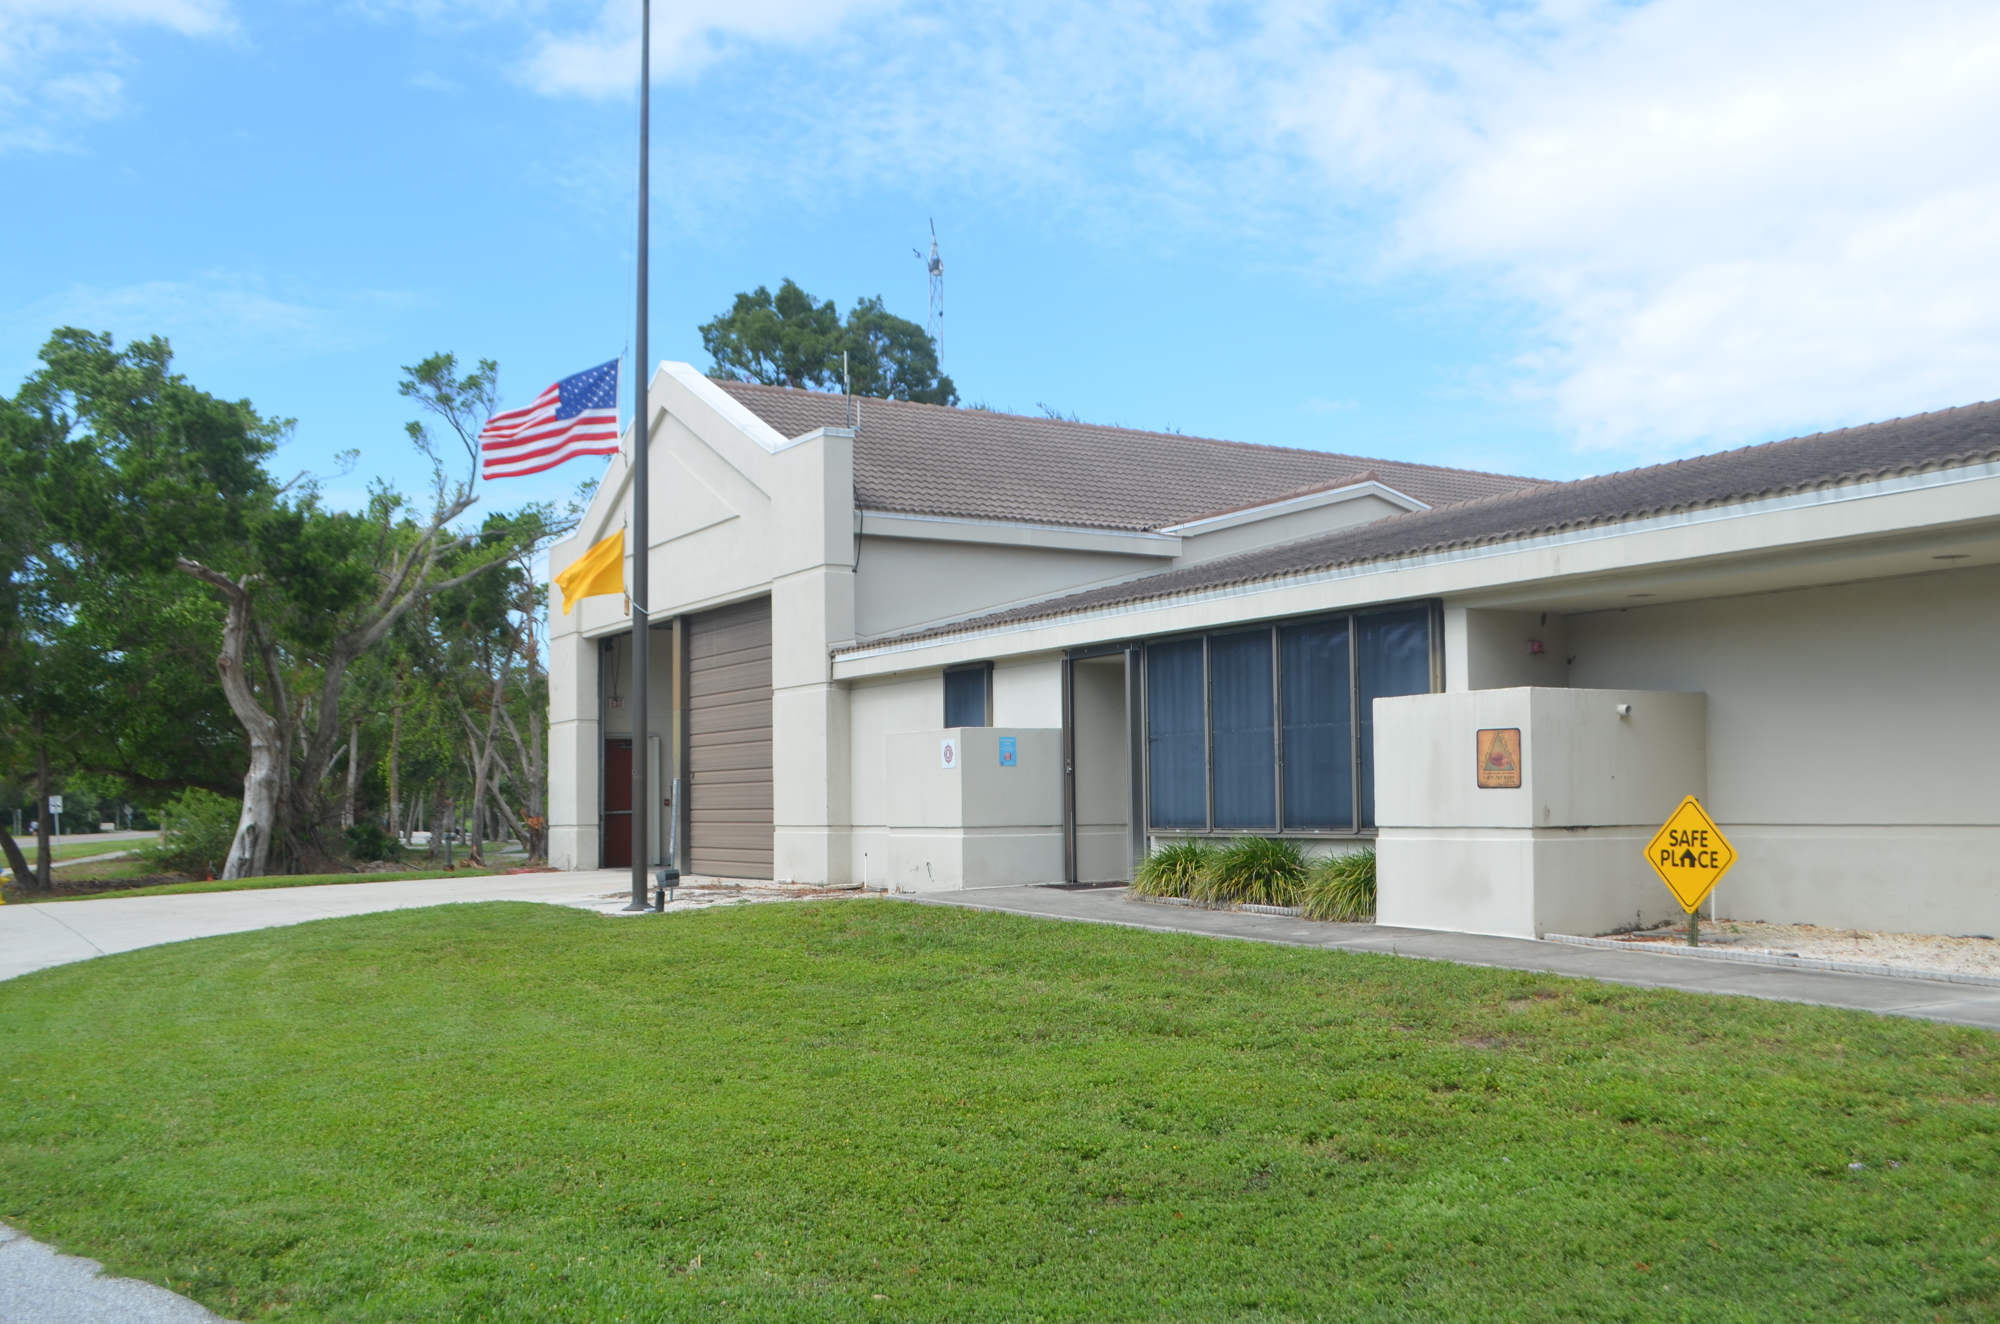 Station 92 as it appears today on the south end of the island.